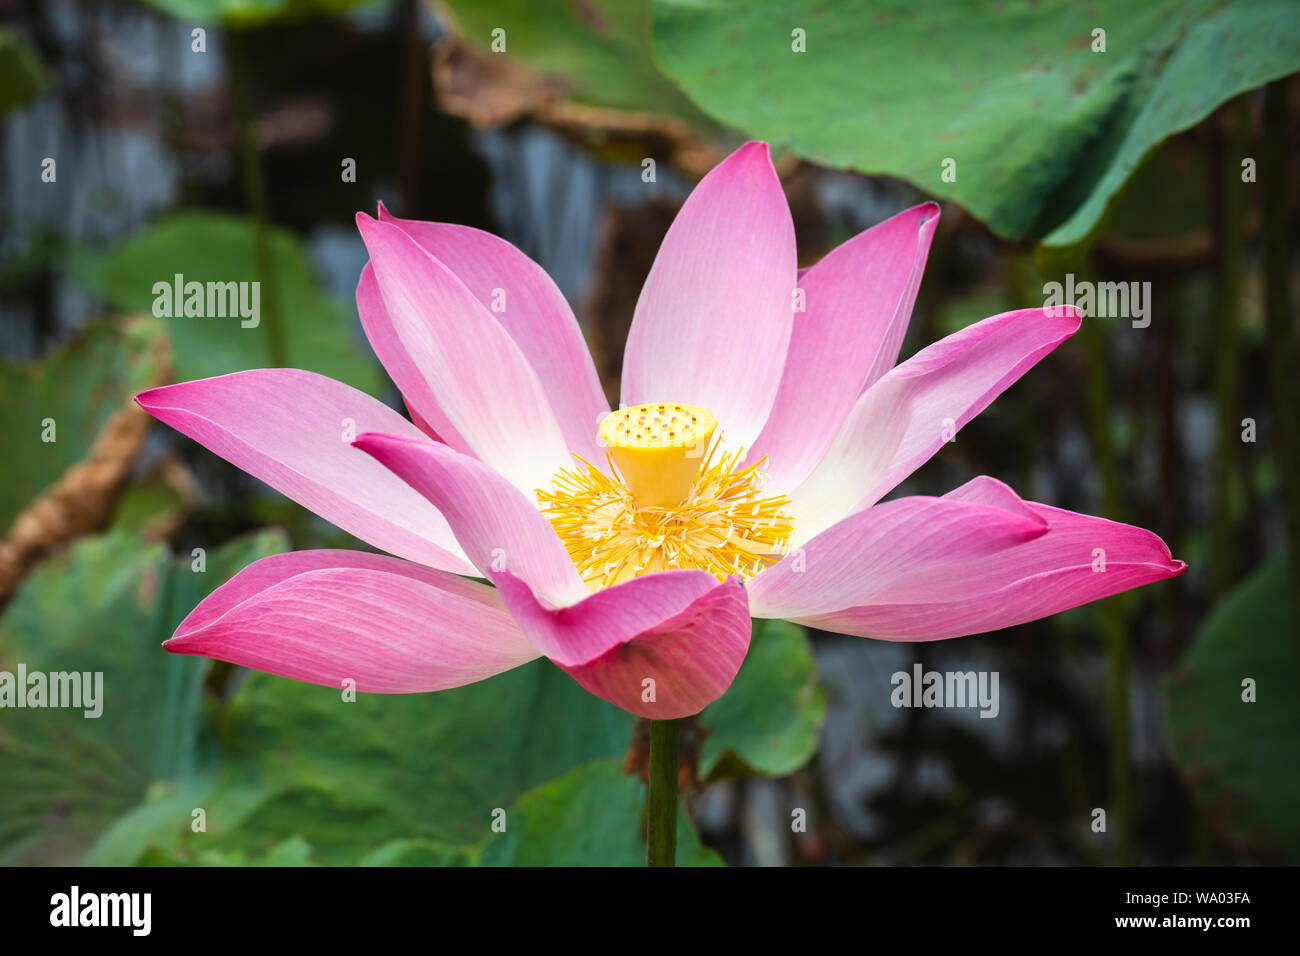 Bright pink lotus or waterlily flower. Close-up photo with selective focus taken in Malaysian rainforest Stock Photo